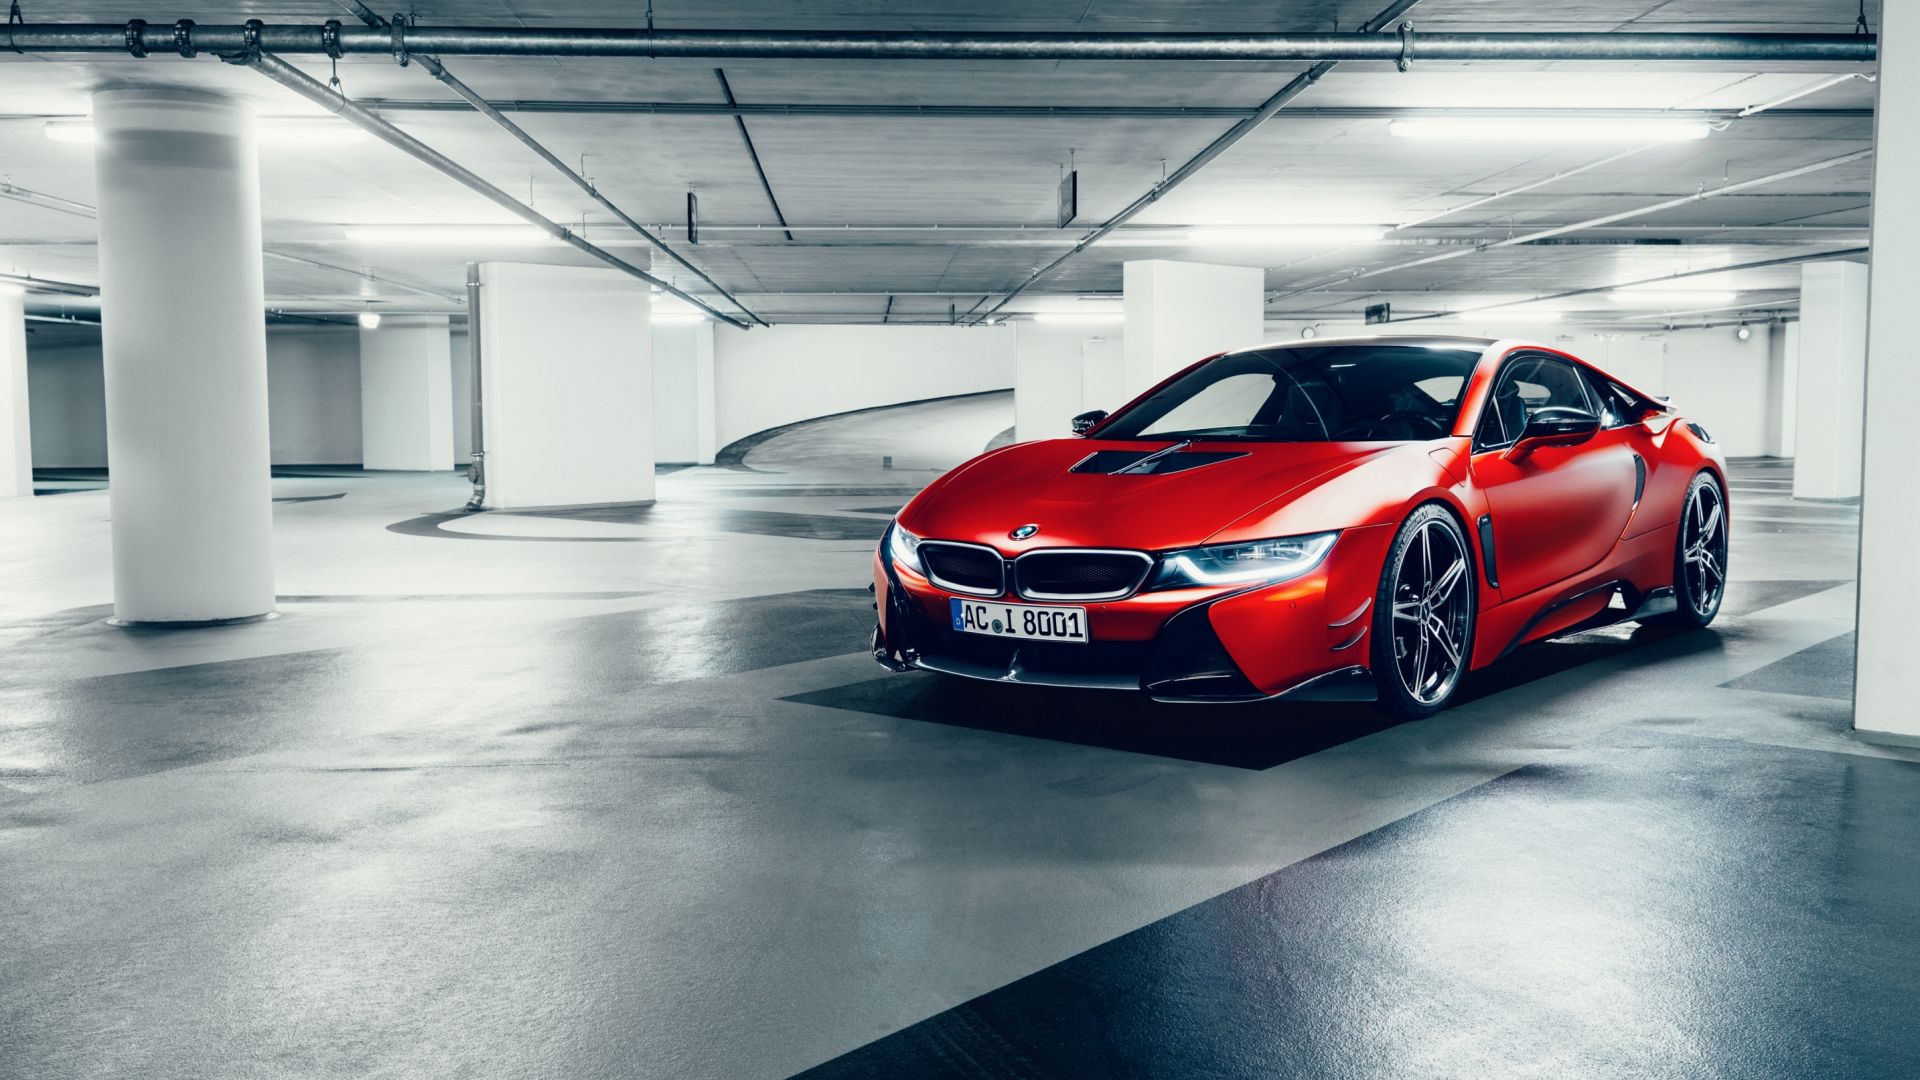 Wallpaper BMW I8 car in parking area